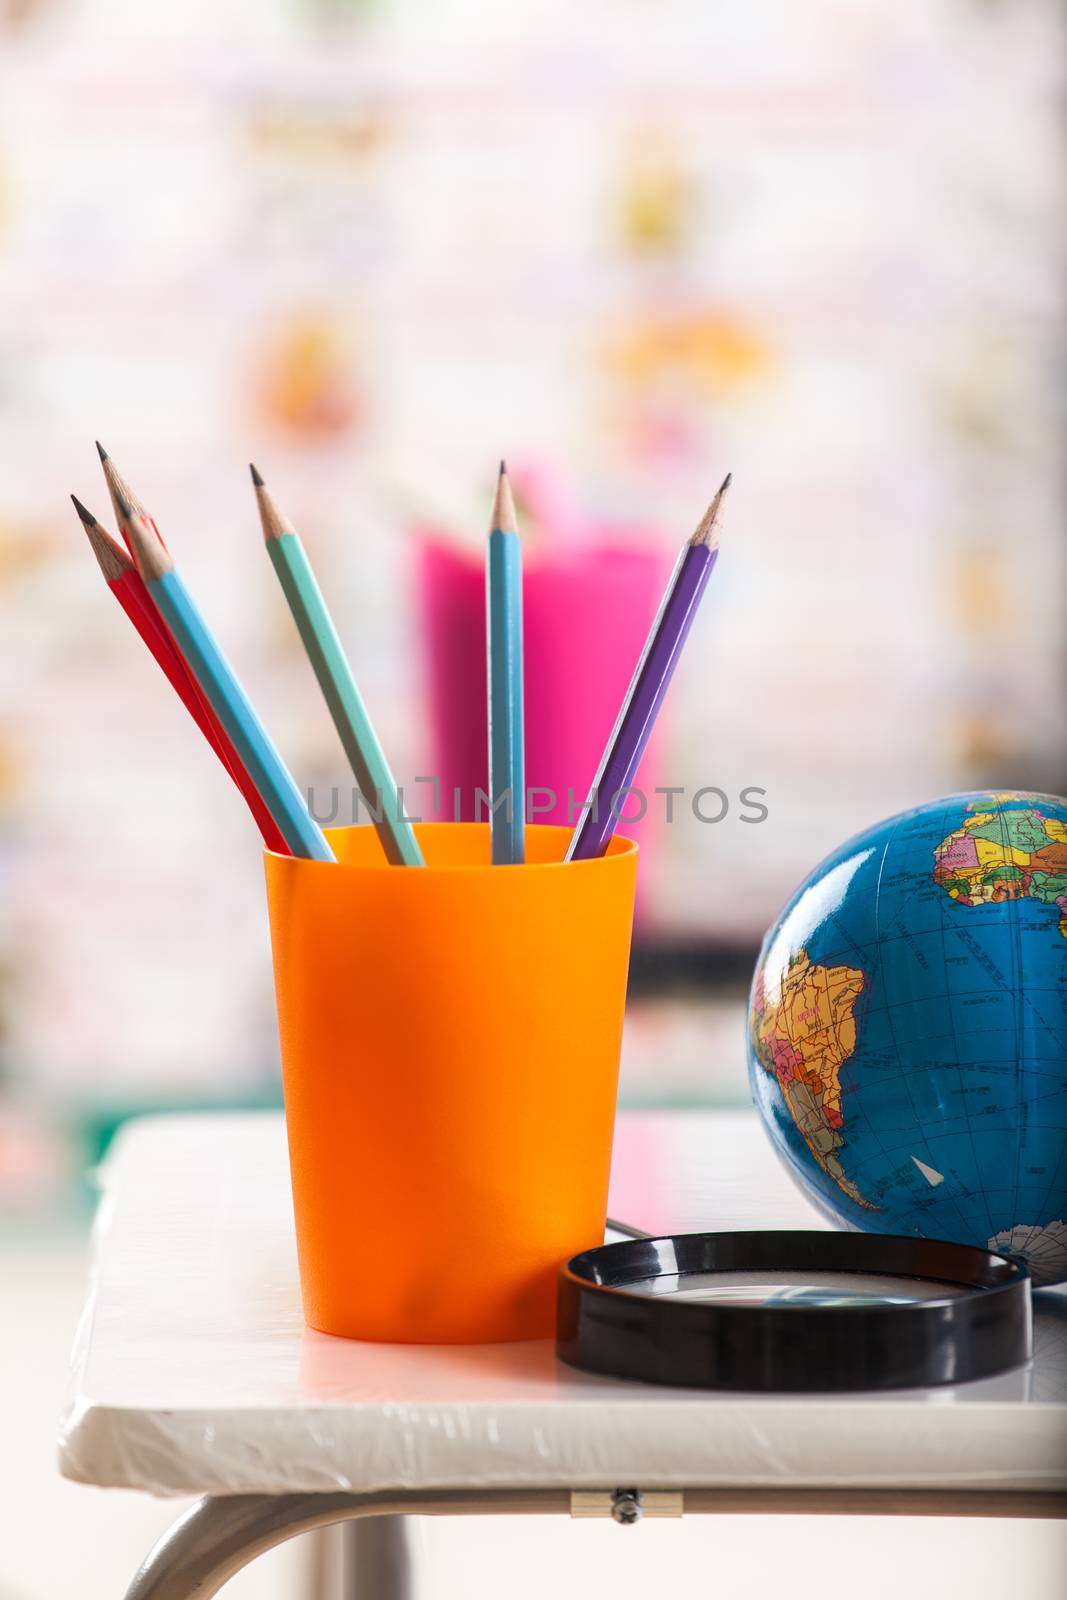 Pencils, globe and book on table 